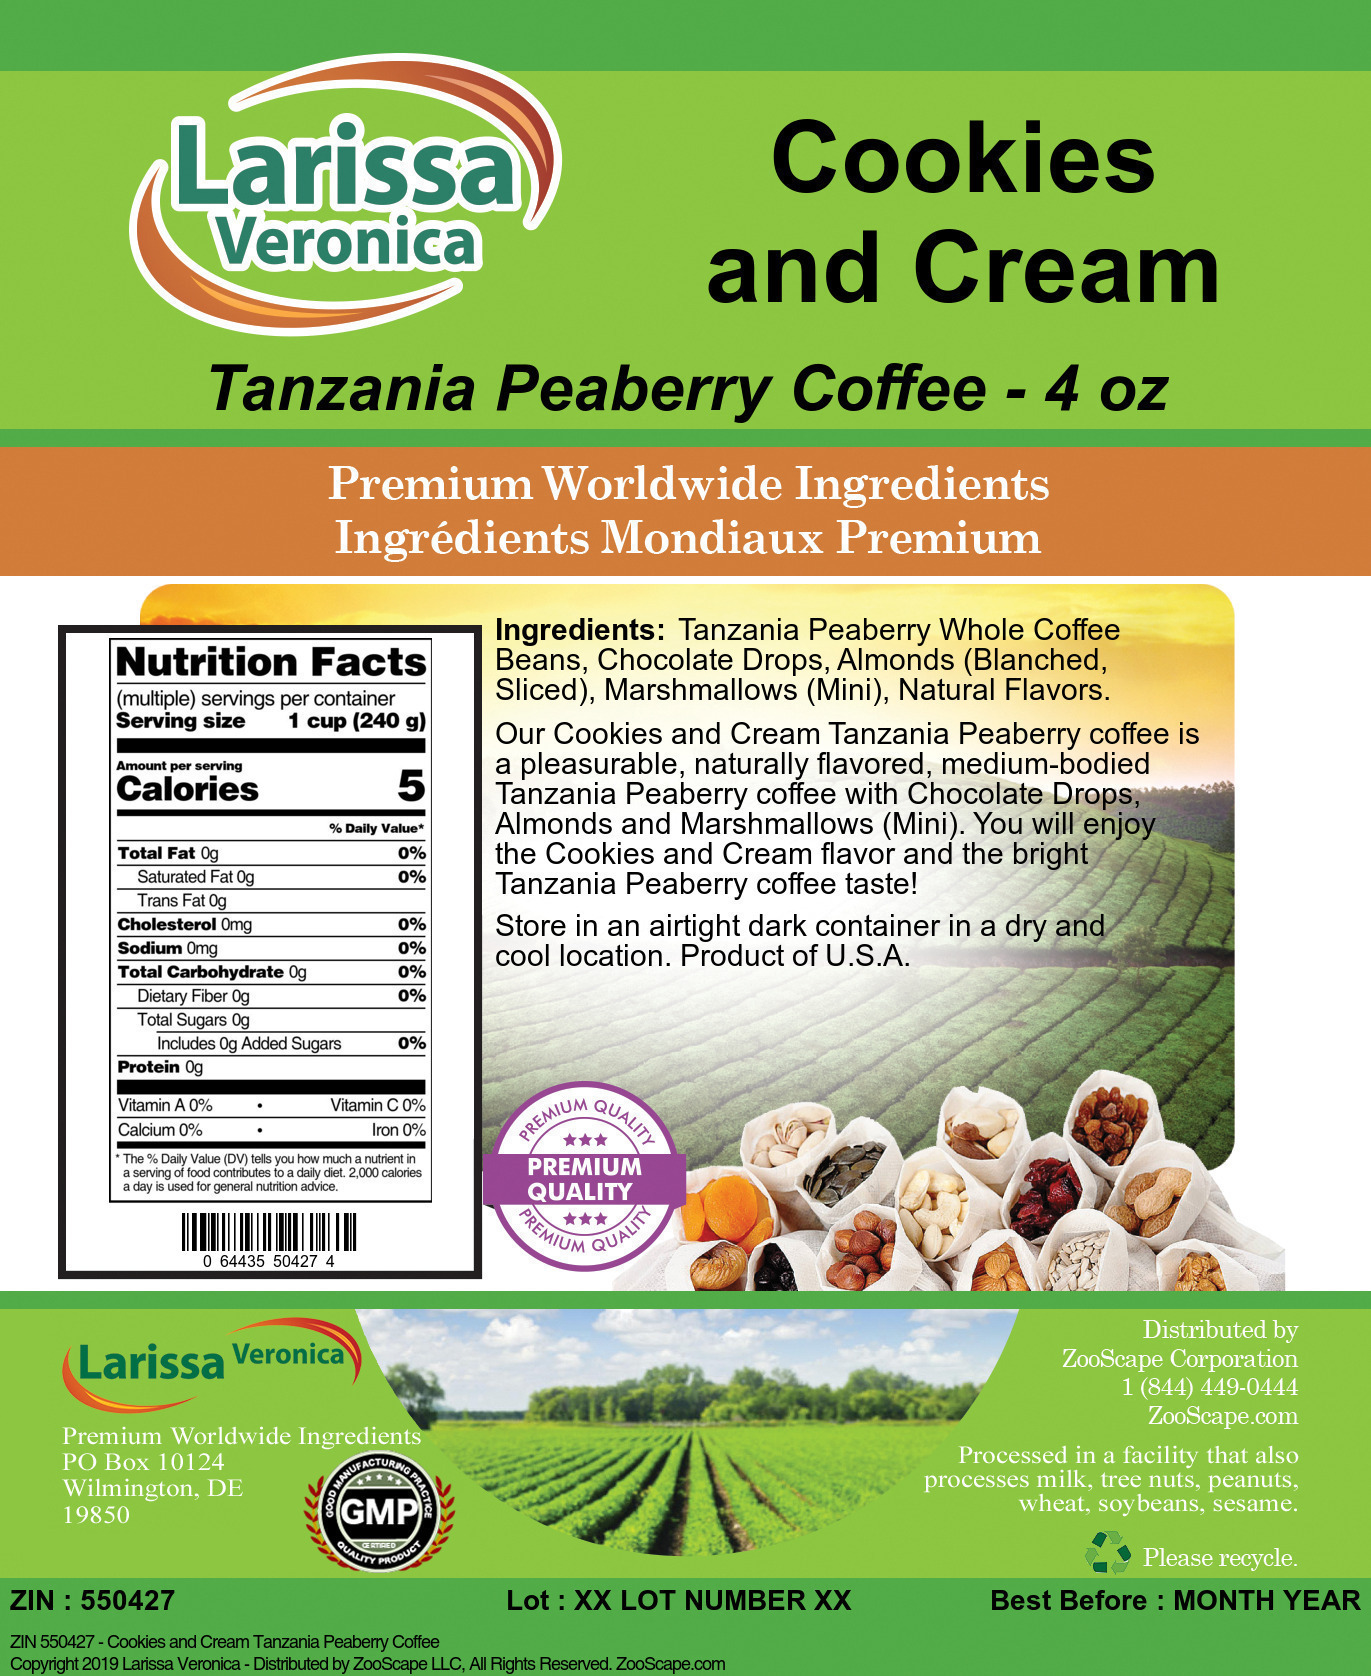 Cookies and Cream Tanzania Peaberry Coffee - Label